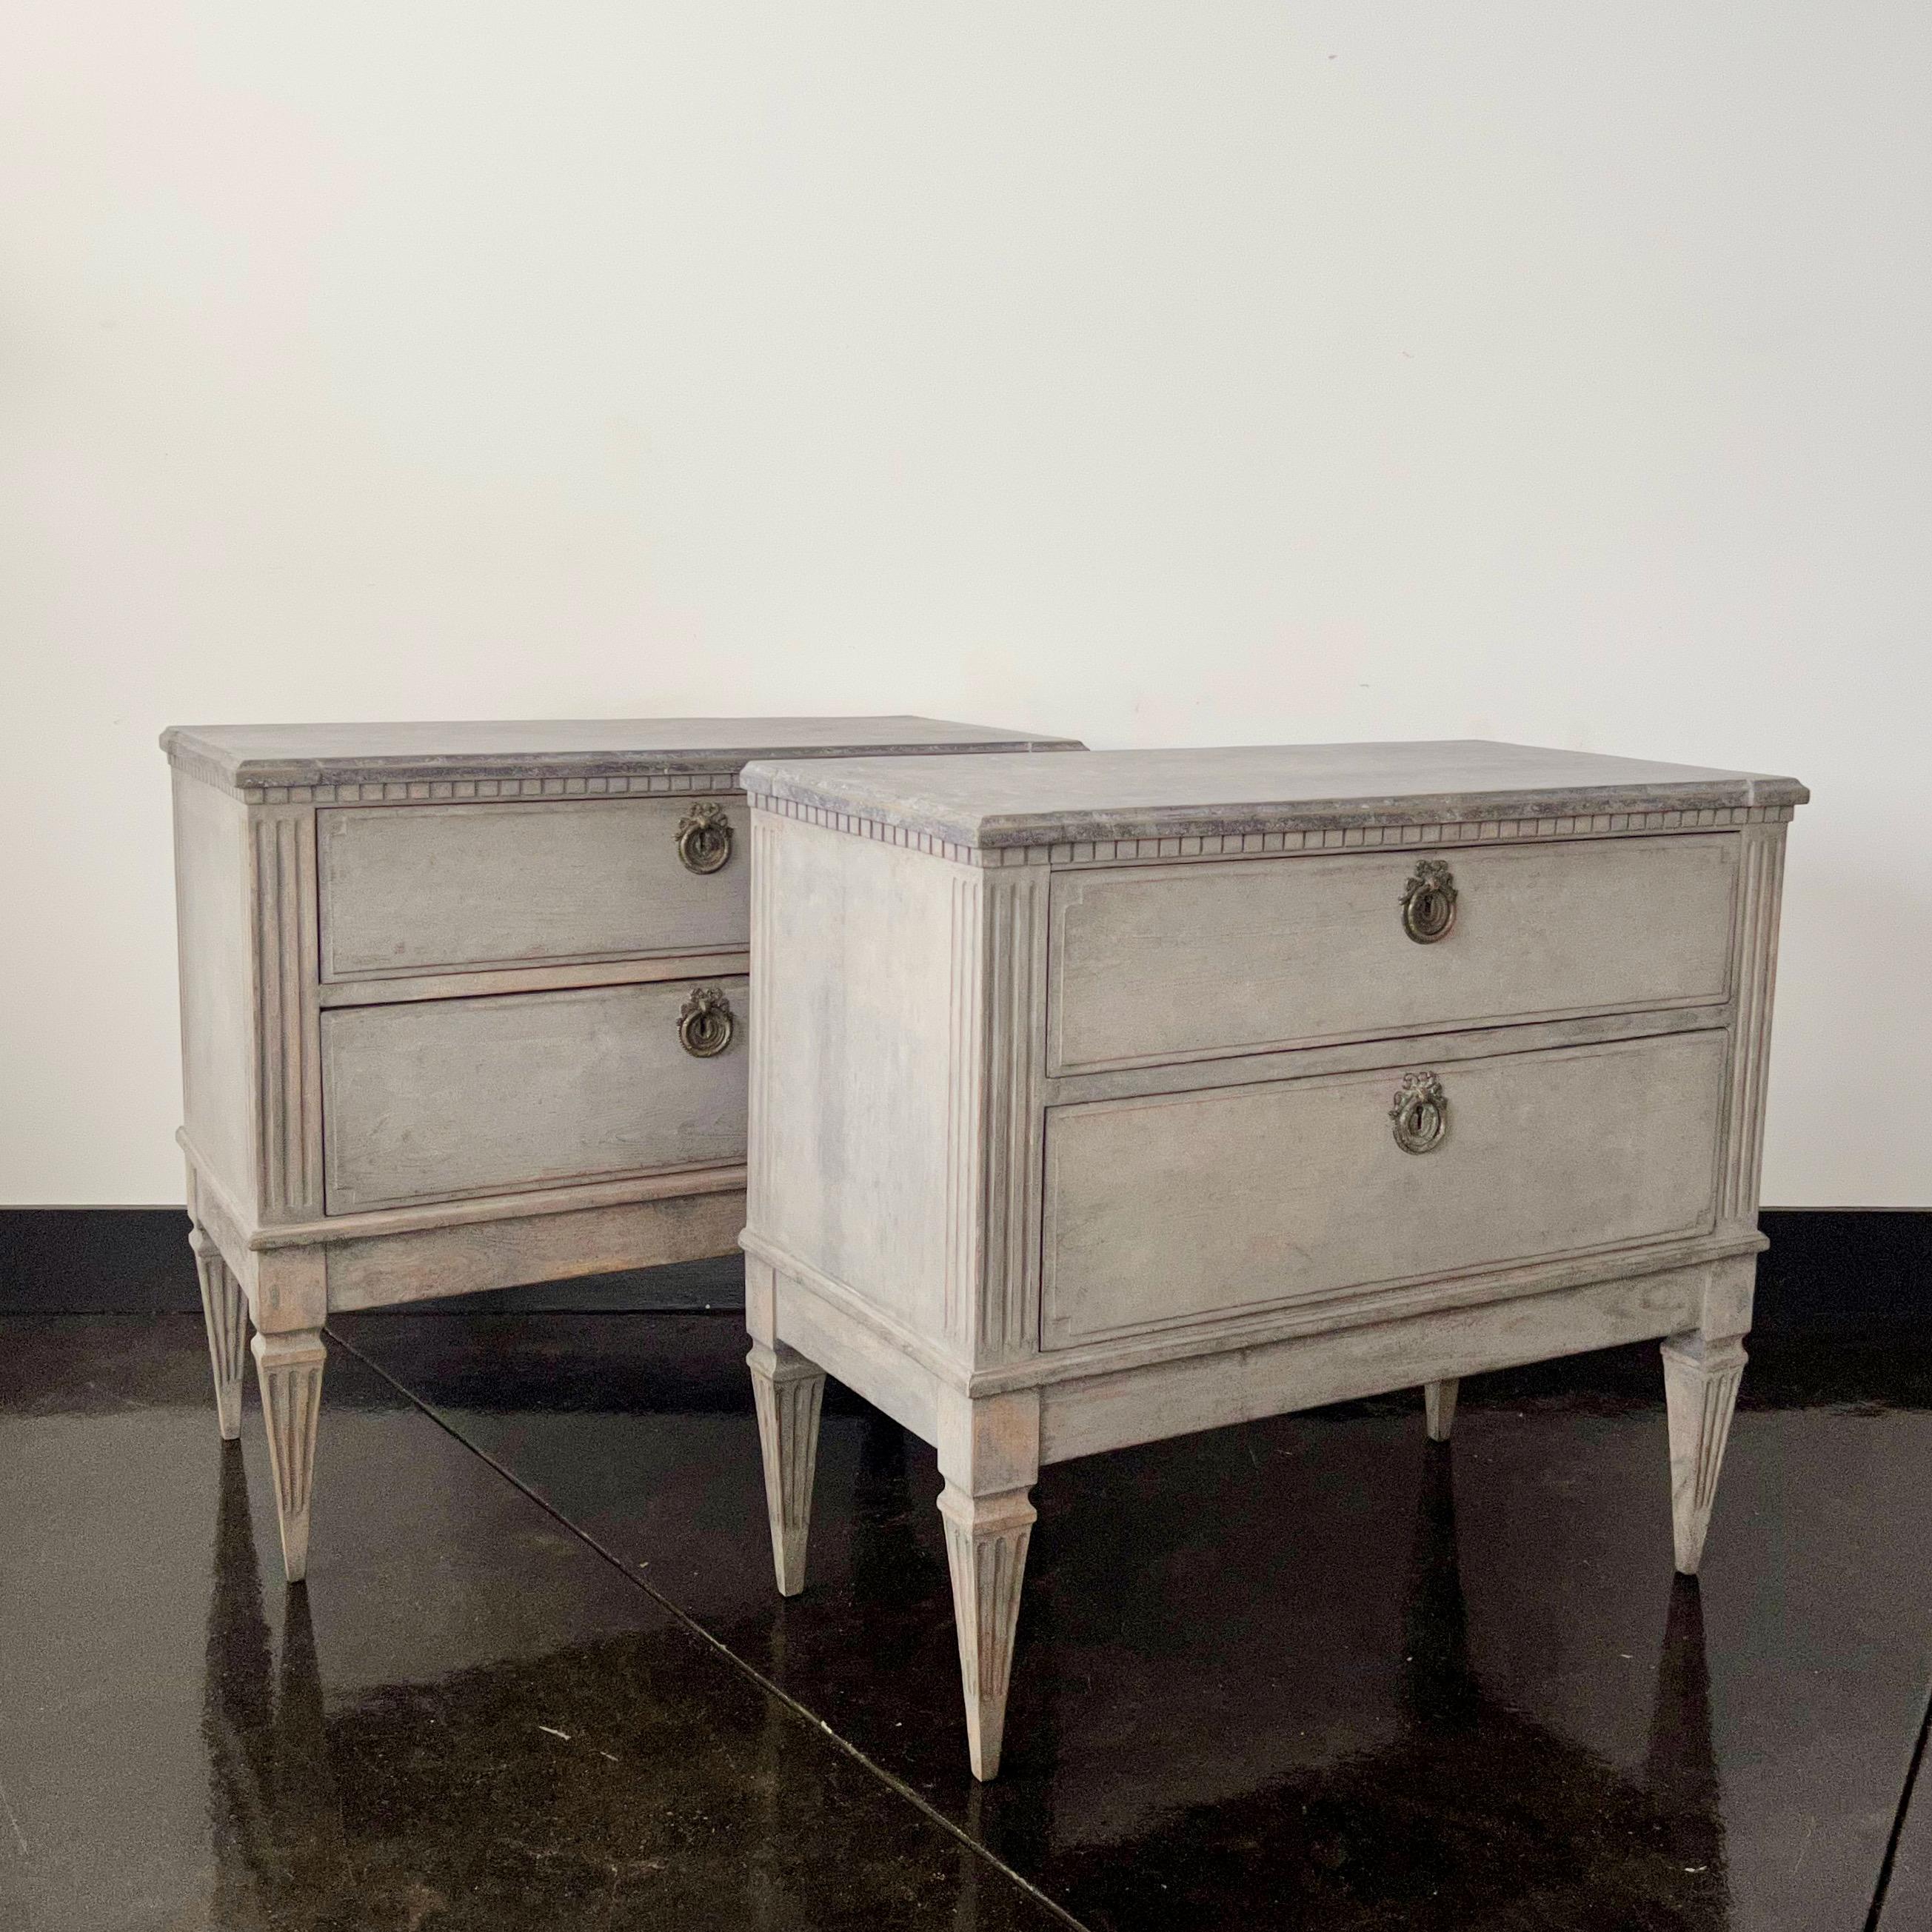 A pair of early 19th century Swedish period Gustavian chest of drawers with brass fittings, shaped marbleized wooden tops, canted and fluted corners posts in light blue finish and darker blu/gray top. 
Sweden, circa 1810.
More than ever, we